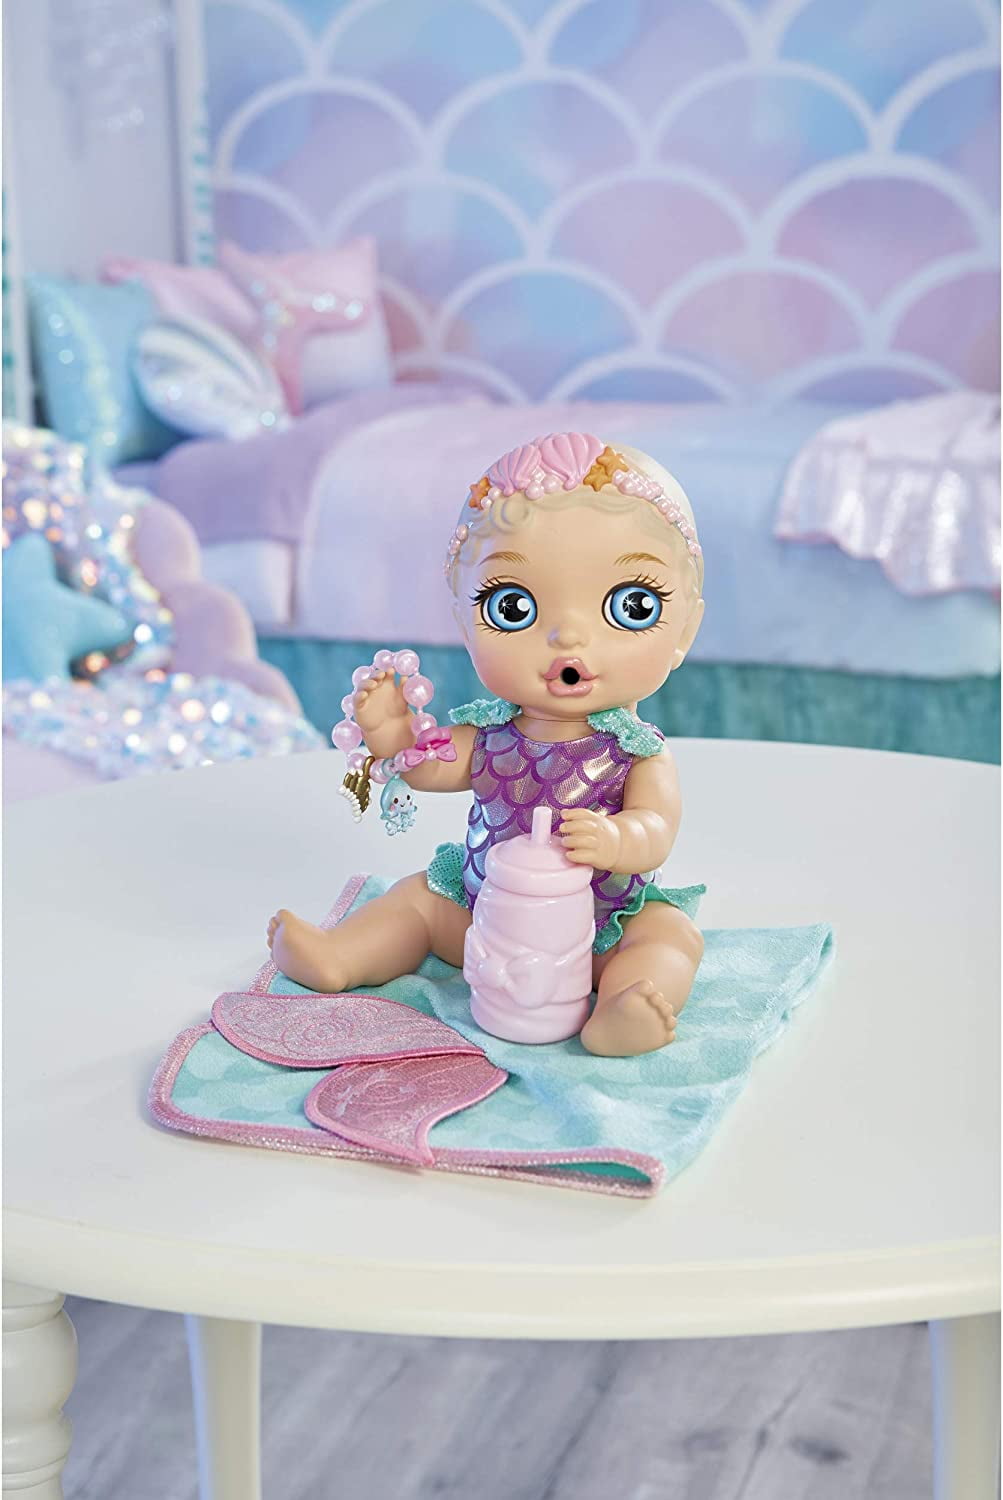 BABY born Surprise Mermaid Surprise – Baby Doll with Purple Towel and 20+  Surprises 